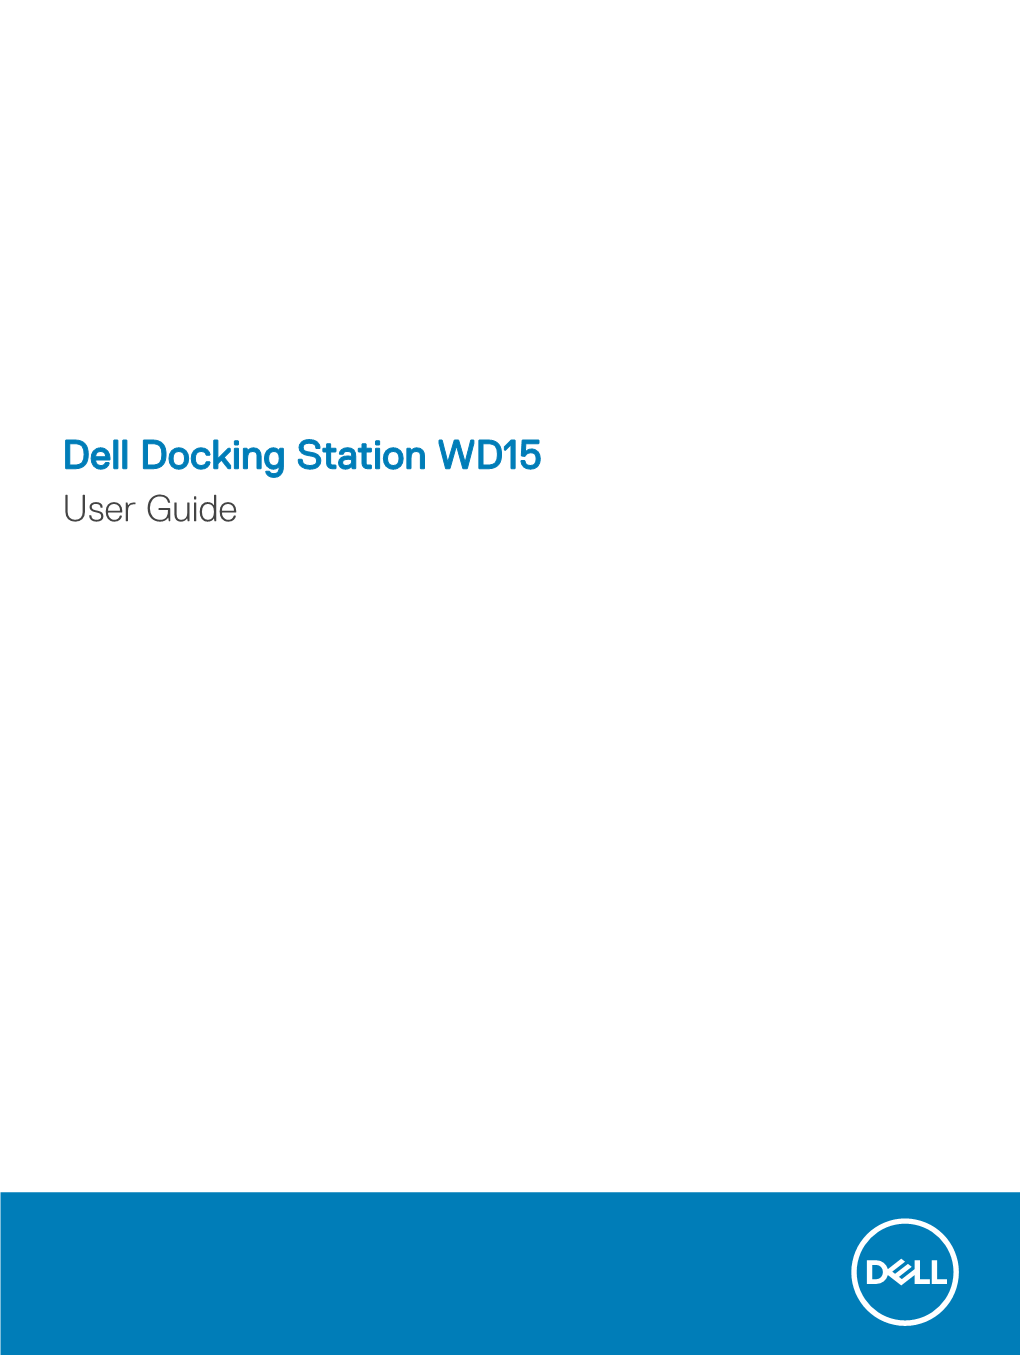 Dell Docking Station WD15 User Guide Notes, Cautions, and Warnings